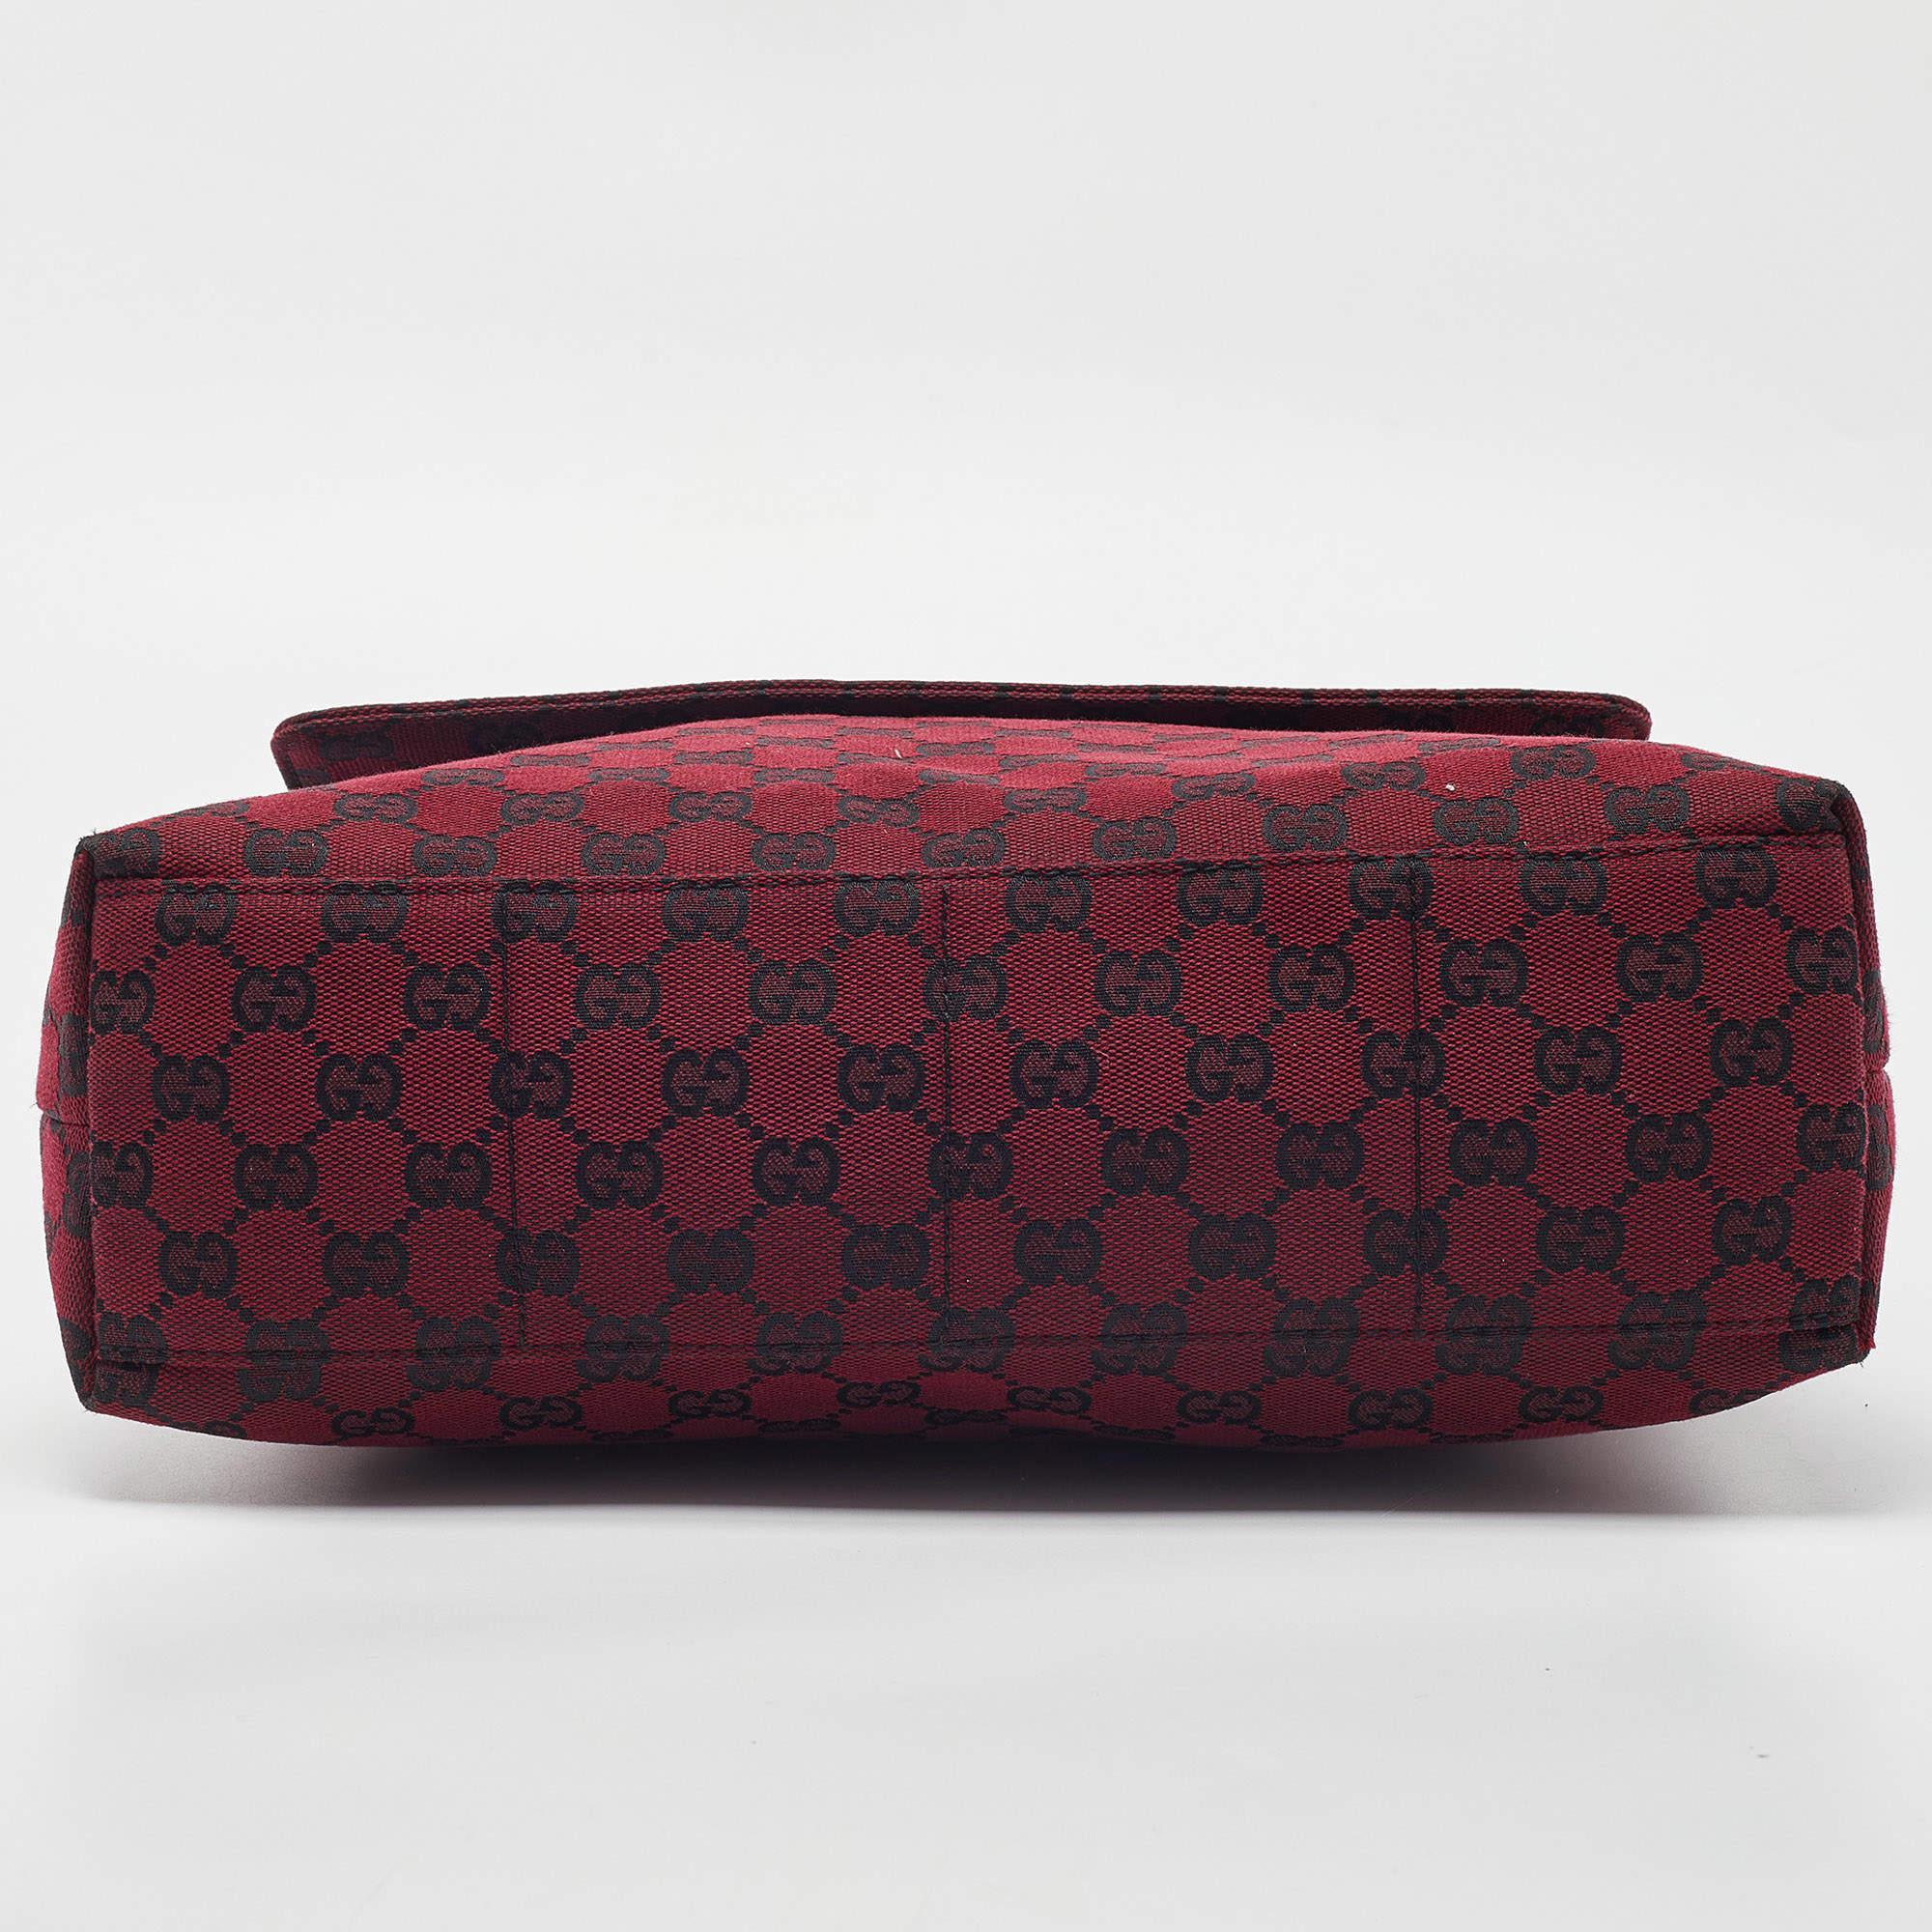 Gucci Red/Black GG Canvas and Leather Messenger Bag 1